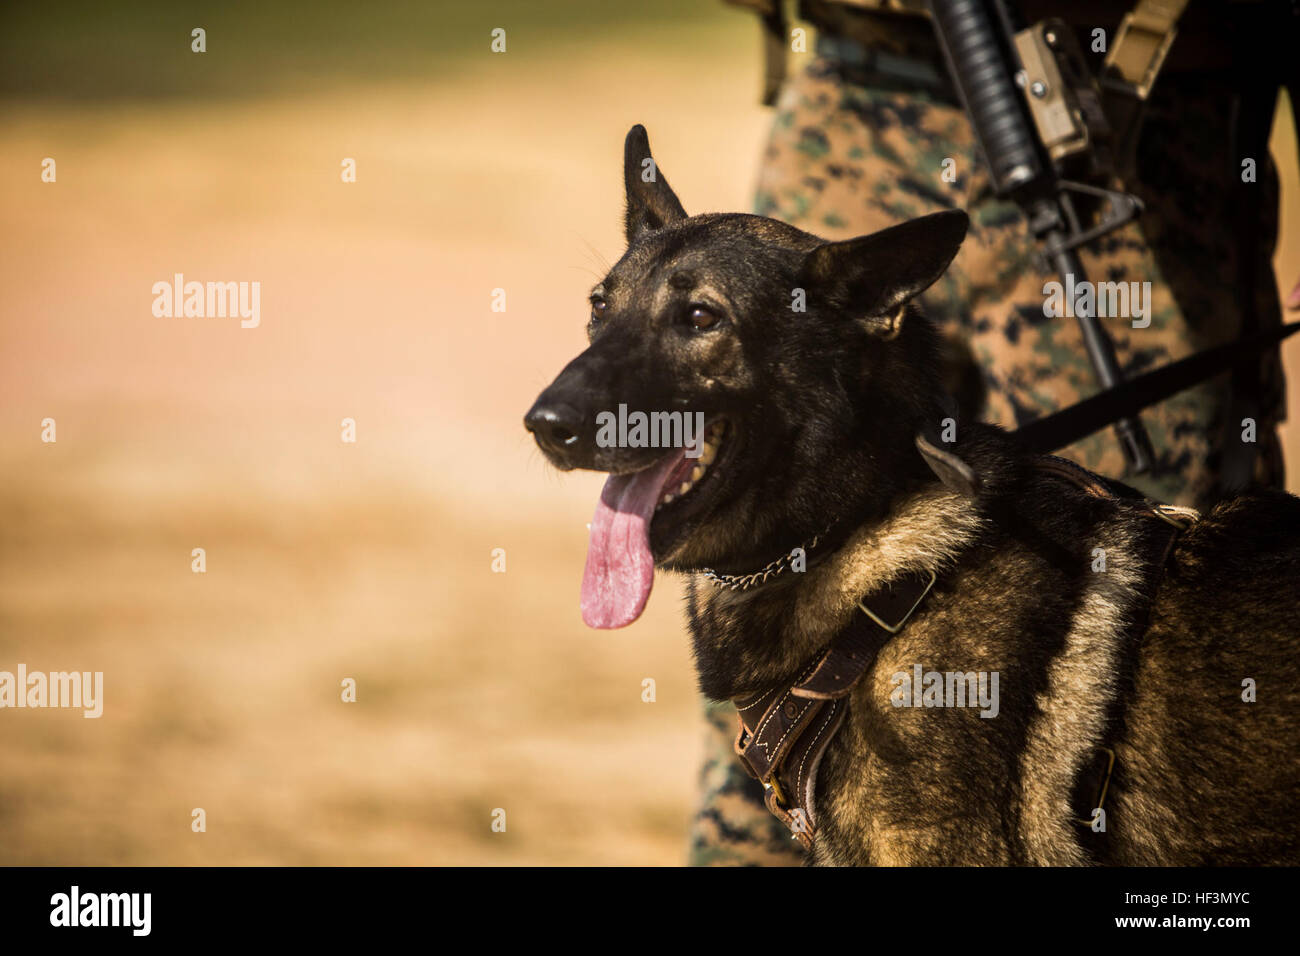 Sgt. Bobo, a military working dog, responds to his handler’s commands after exiting a CH-53E Super Stallion in support of Blue Chromite 16 in the Central Training Area, Okinawa, Japan, Oct. 28, 2015. Bobo was tasked with tracking down the pilot and aircrew of a simulated downed aircraft. Blue Chromite is a large-scale amphibious exercise that draws primarily from III Marine Expeditionary Force’s training resources on Okinawa. The location of the training allows participating units to maintain a forward-deployed posture and eliminates the cost of traveling to train. Bobo is with 3rd Law Enforce Stock Photo